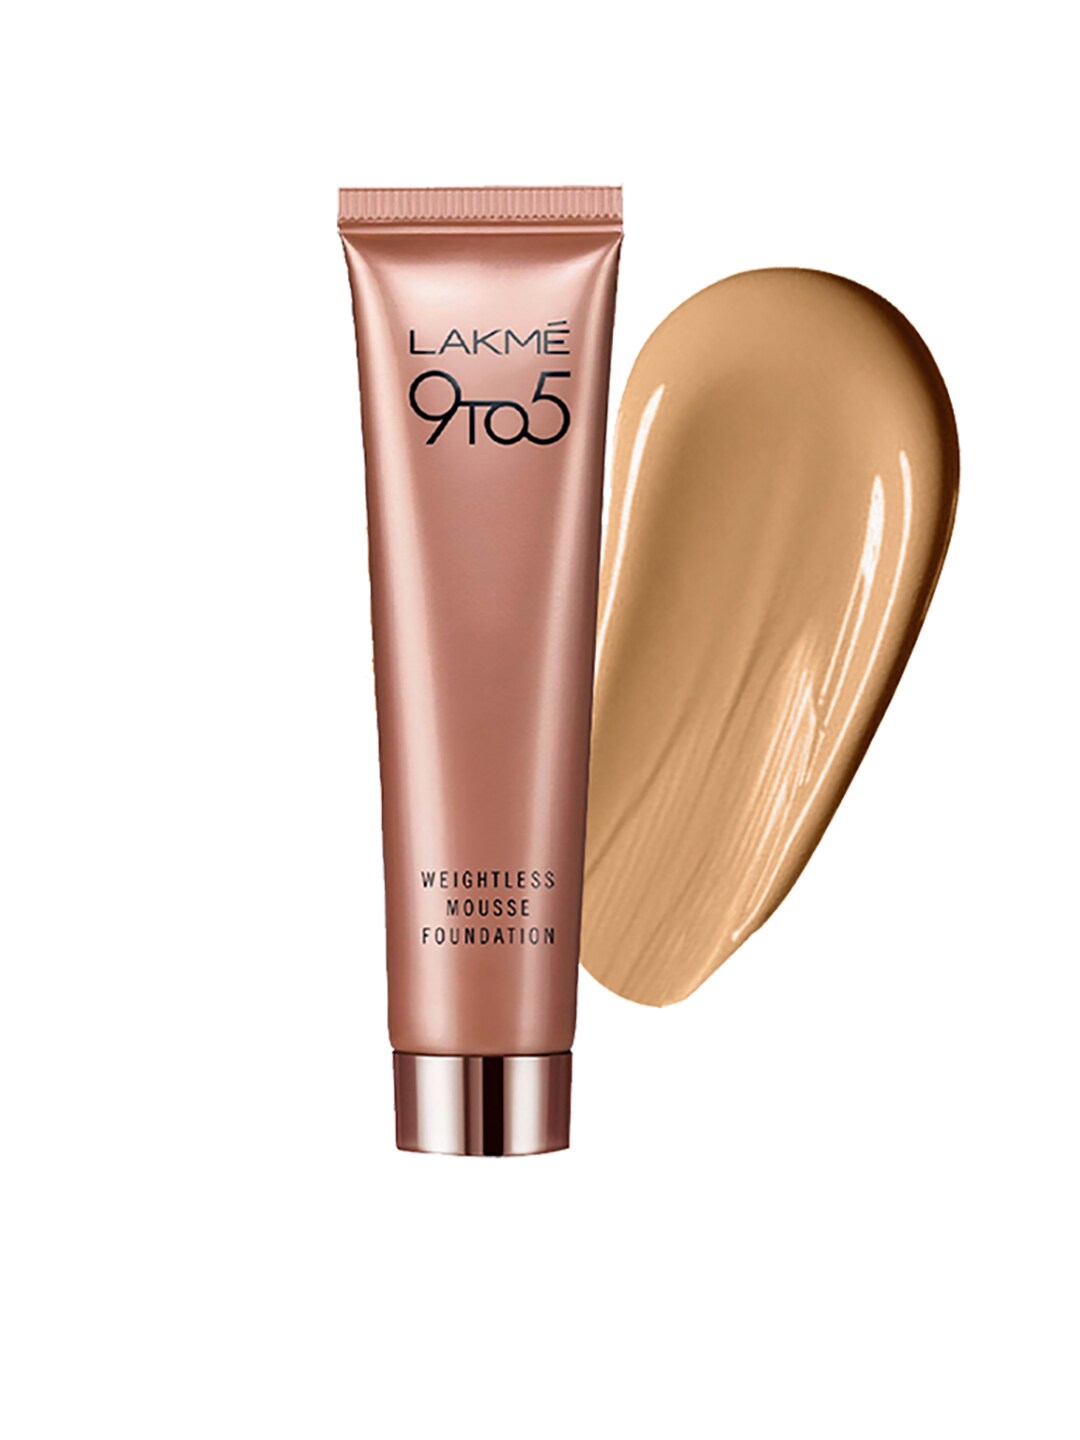 Lakme 9 to 5 Weightless Mousse Foundation - Honey Dew 09 25g Price in India